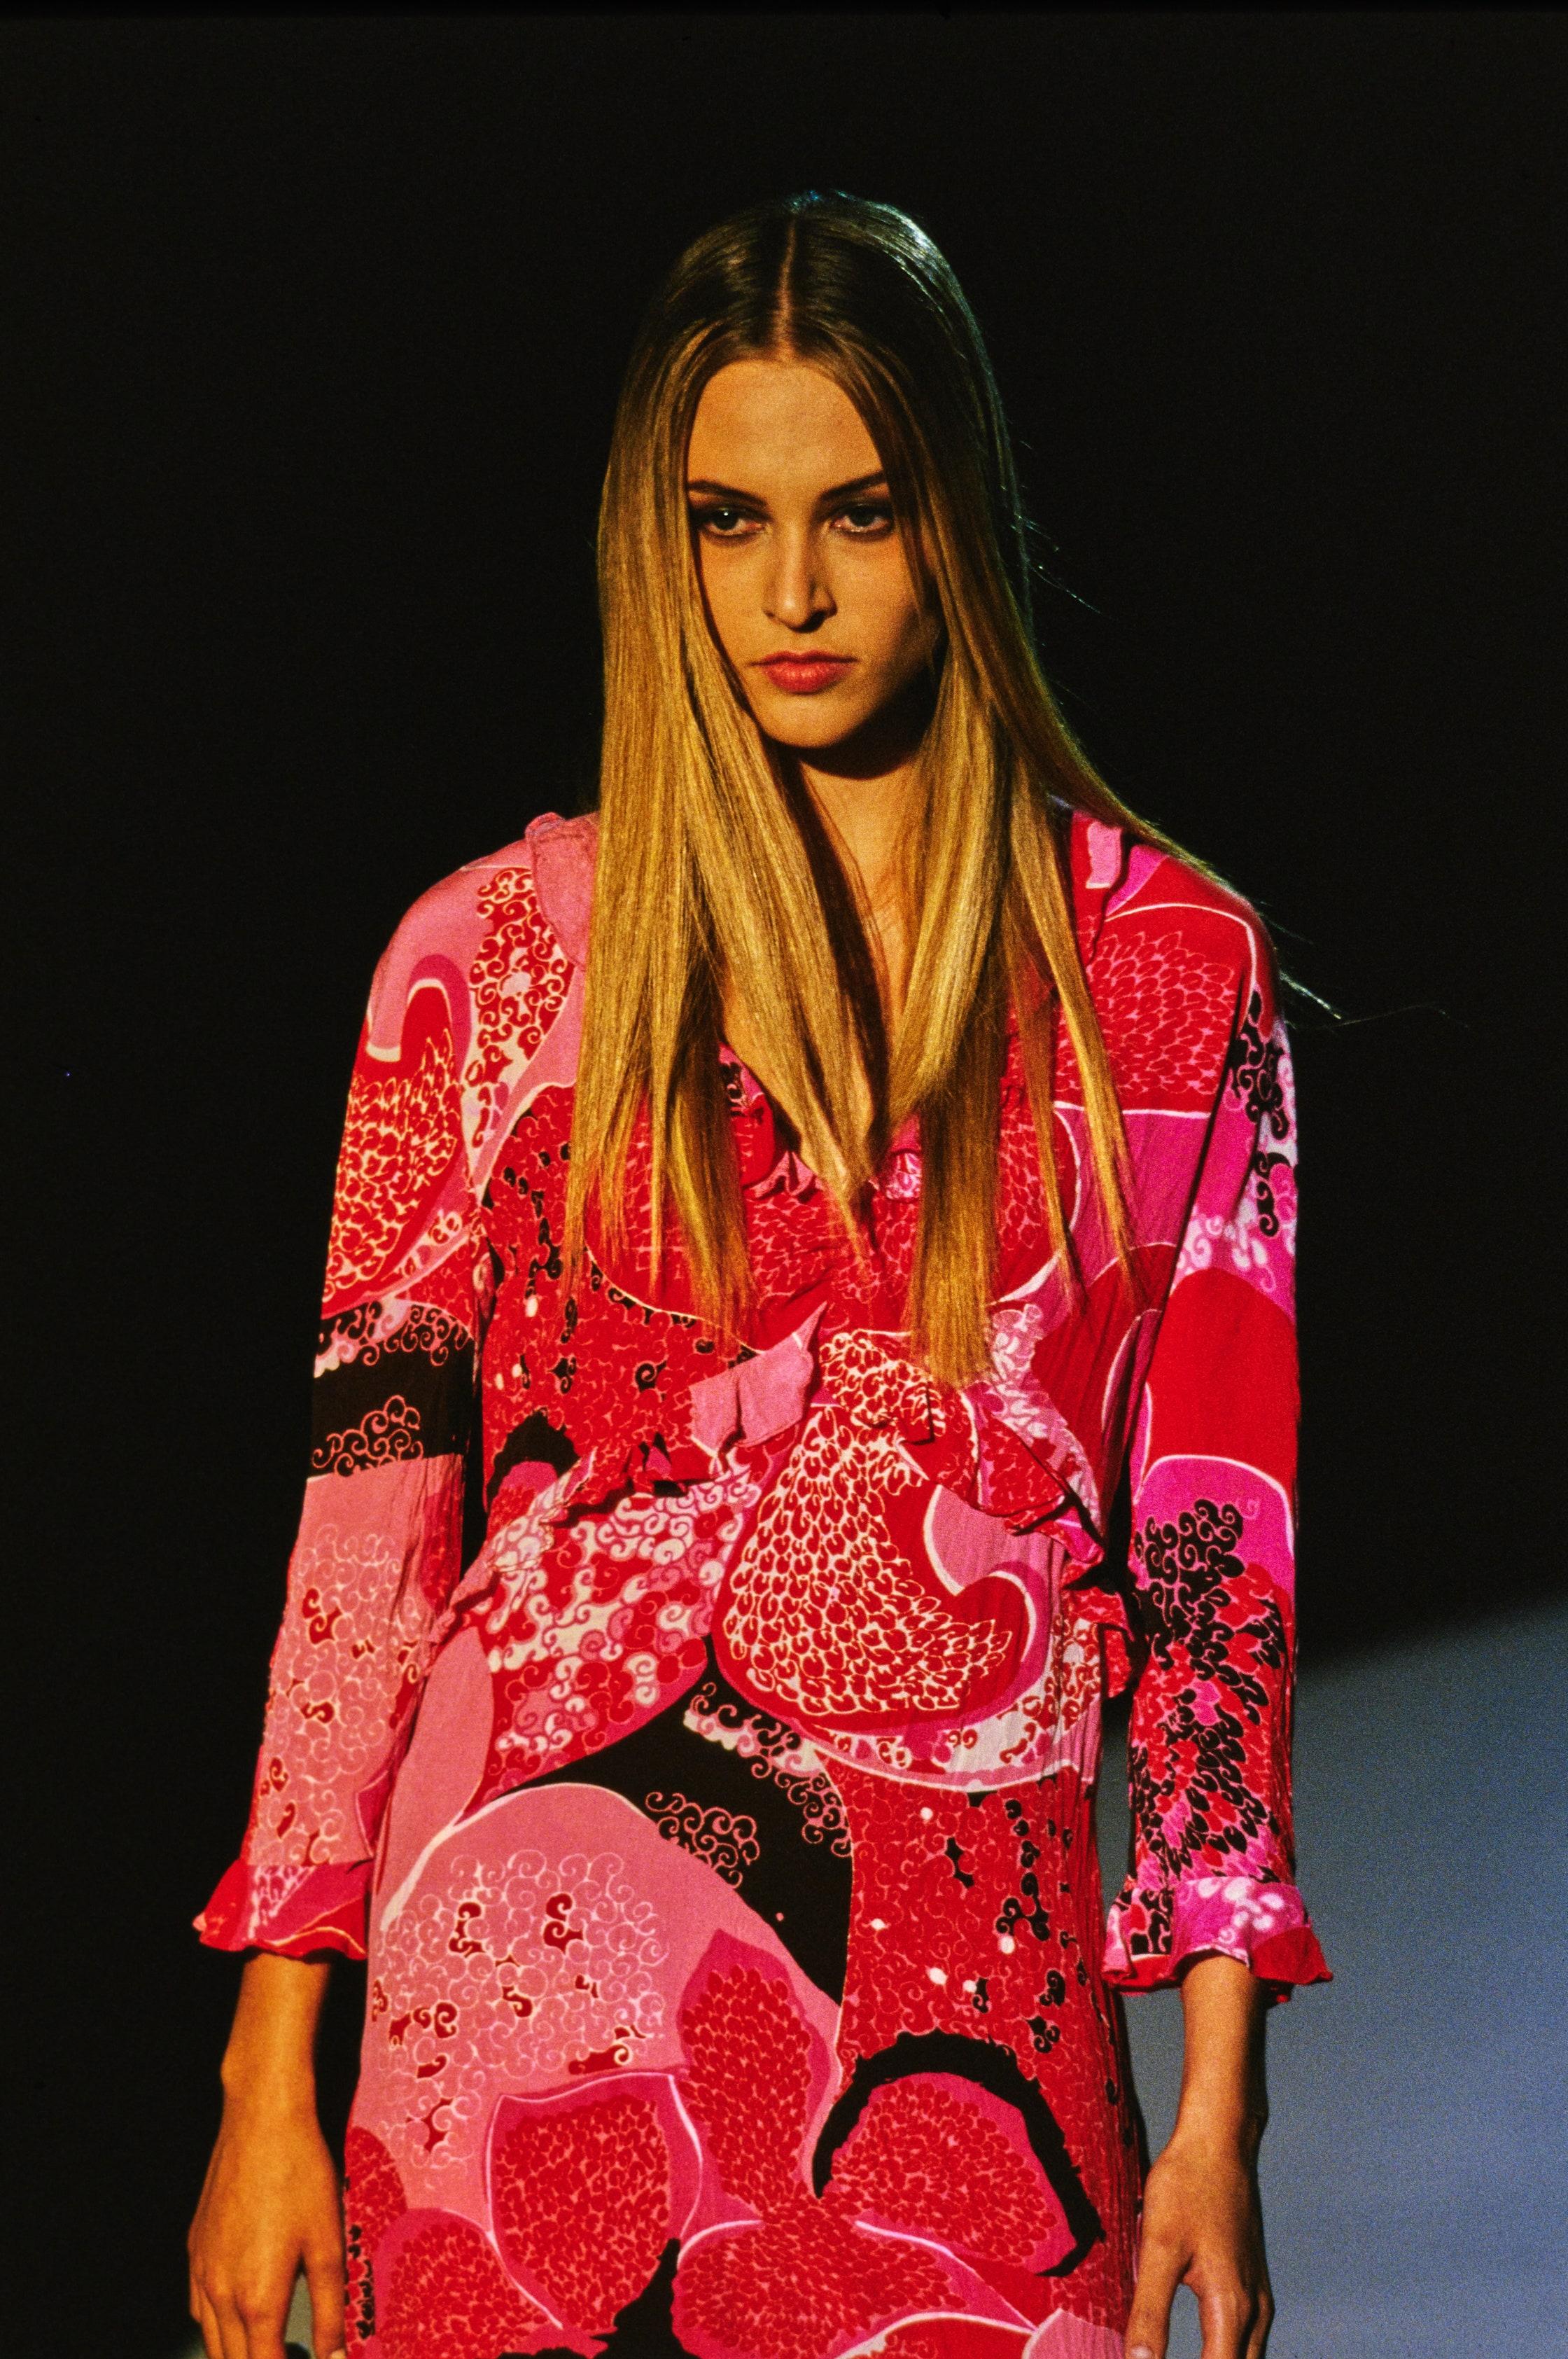 Presenting a vibrant 'acid flower' pink and red Gucci scarf, designed by Tom Ford. This beautiful scarf is from the Spring/Summer 1999 collection where this pattern debuted on two runway looks. Vogue interprets this collection as “a more colorful